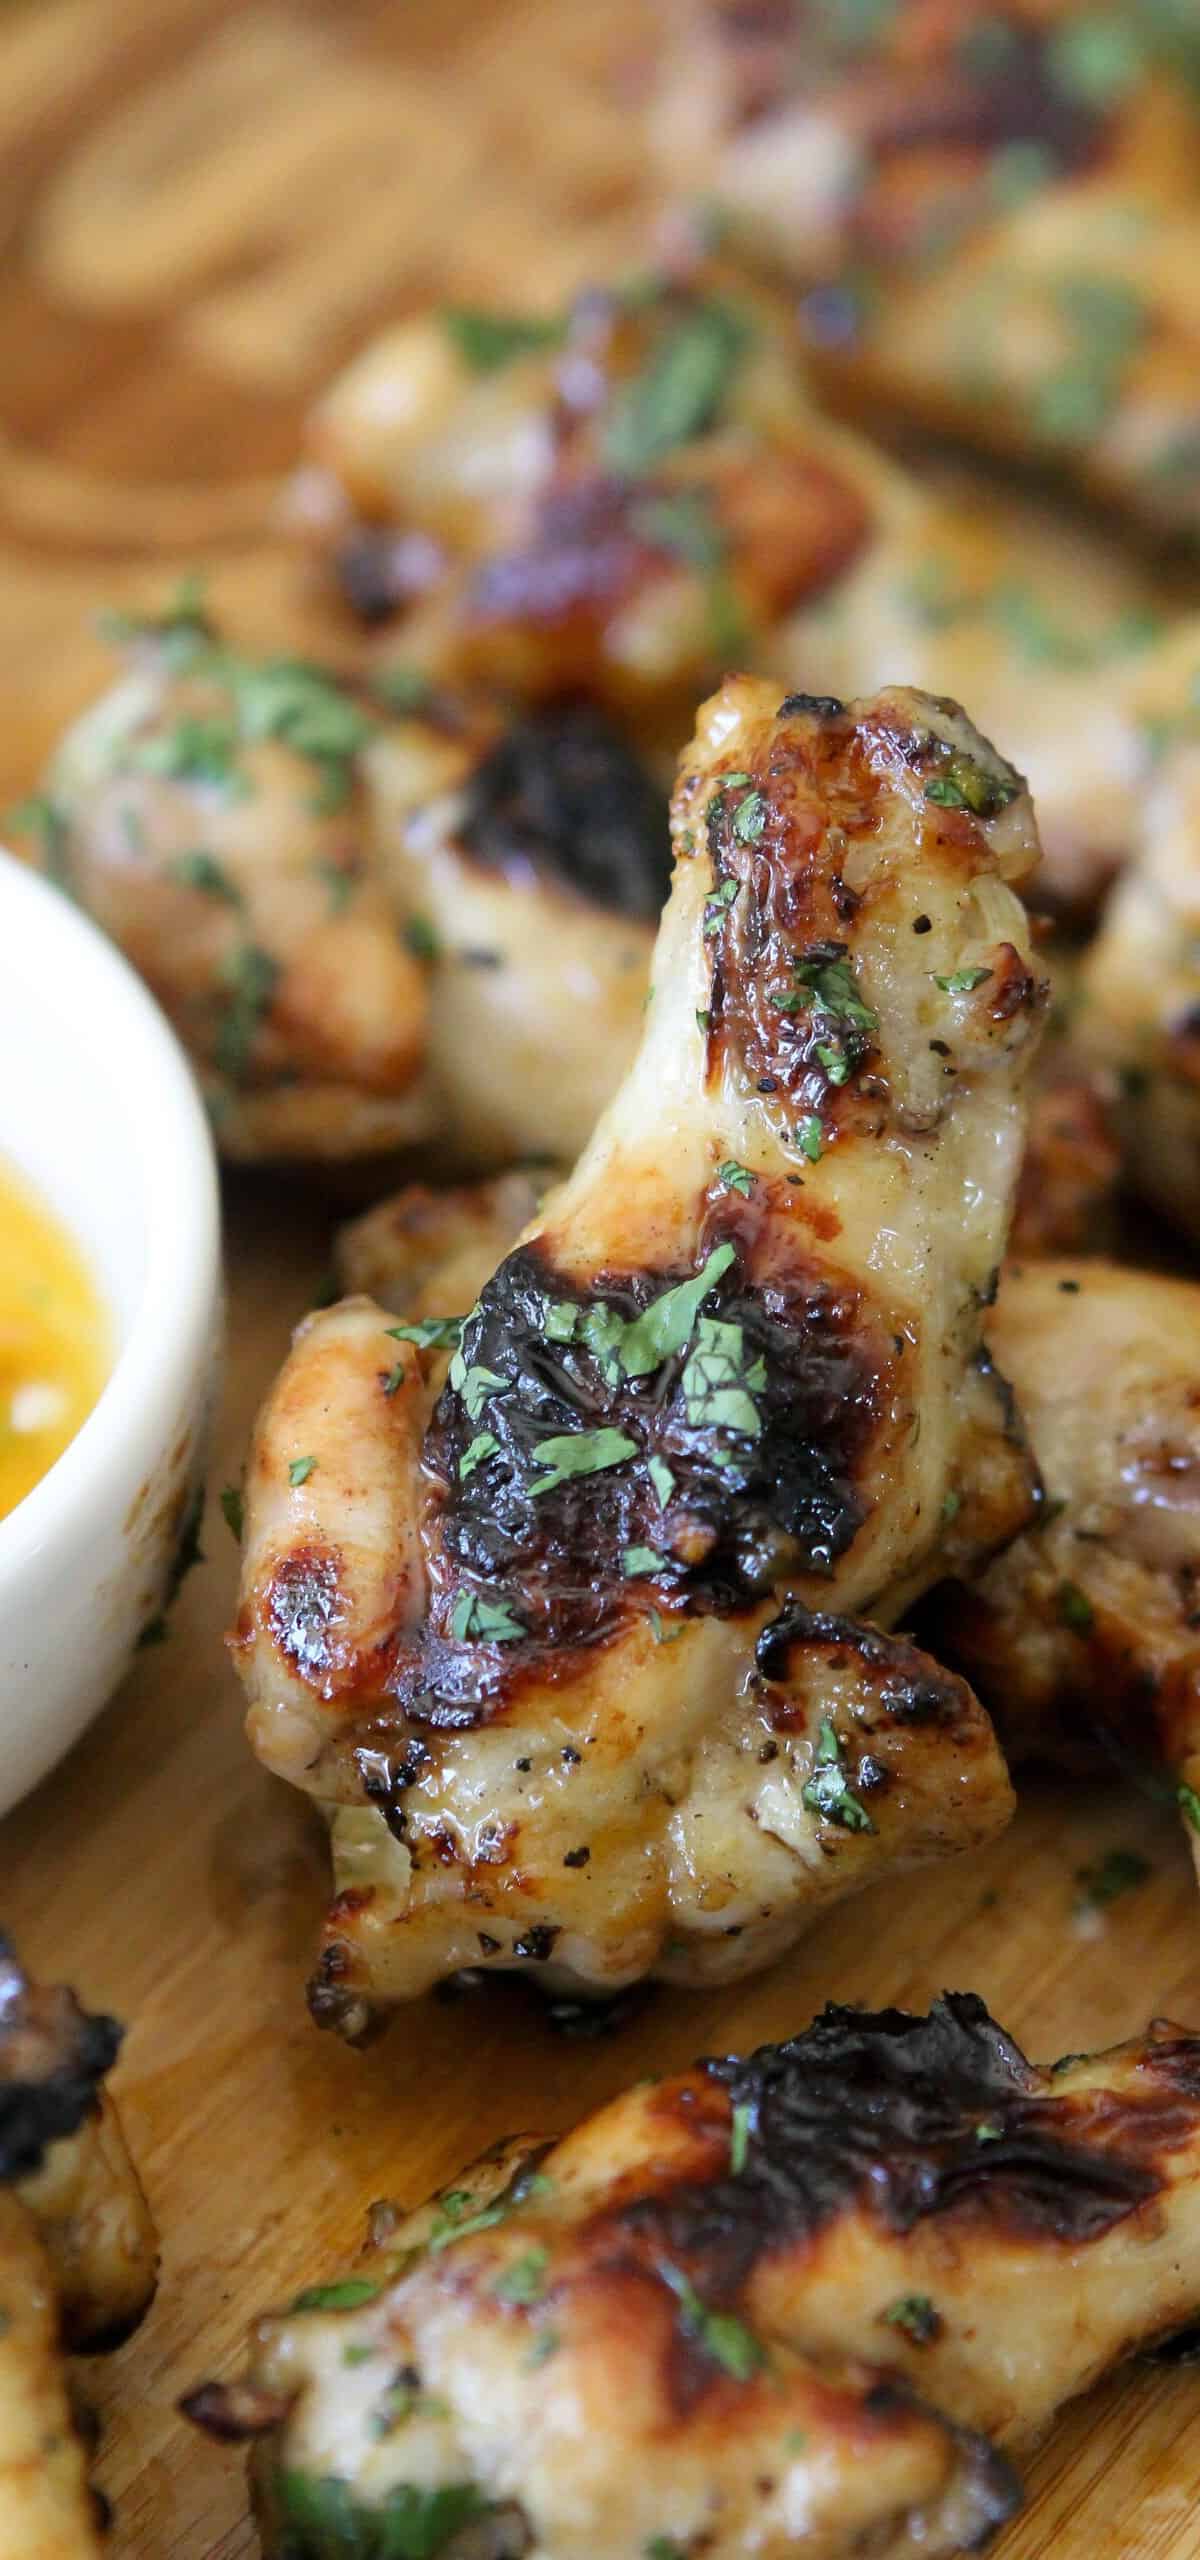  Your favorite hot wings just got better with this Jala-Peach sauce.